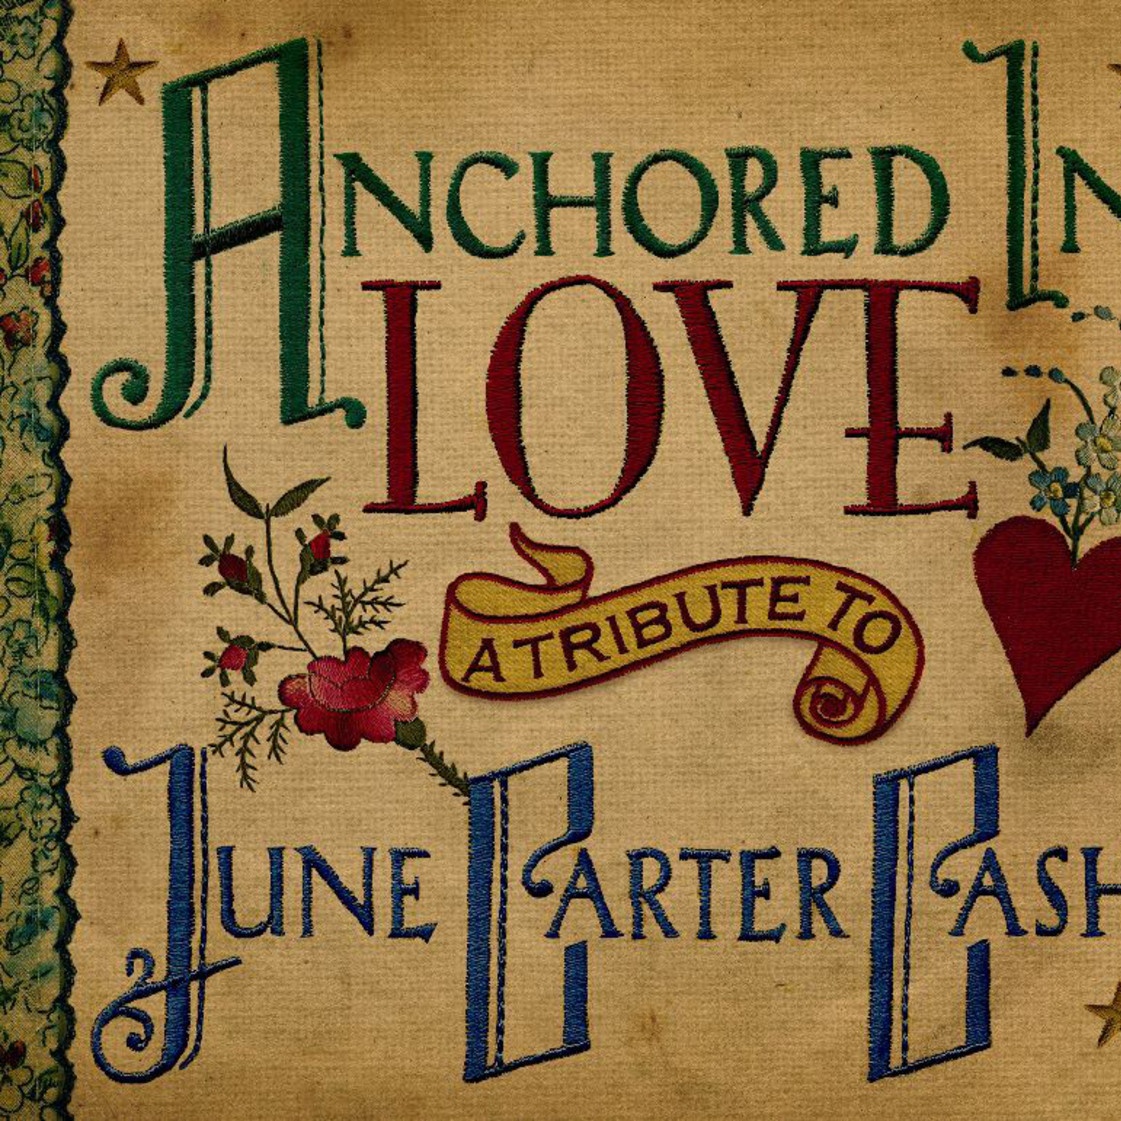 Anchored in Love: A Tribute to June Carter Cash